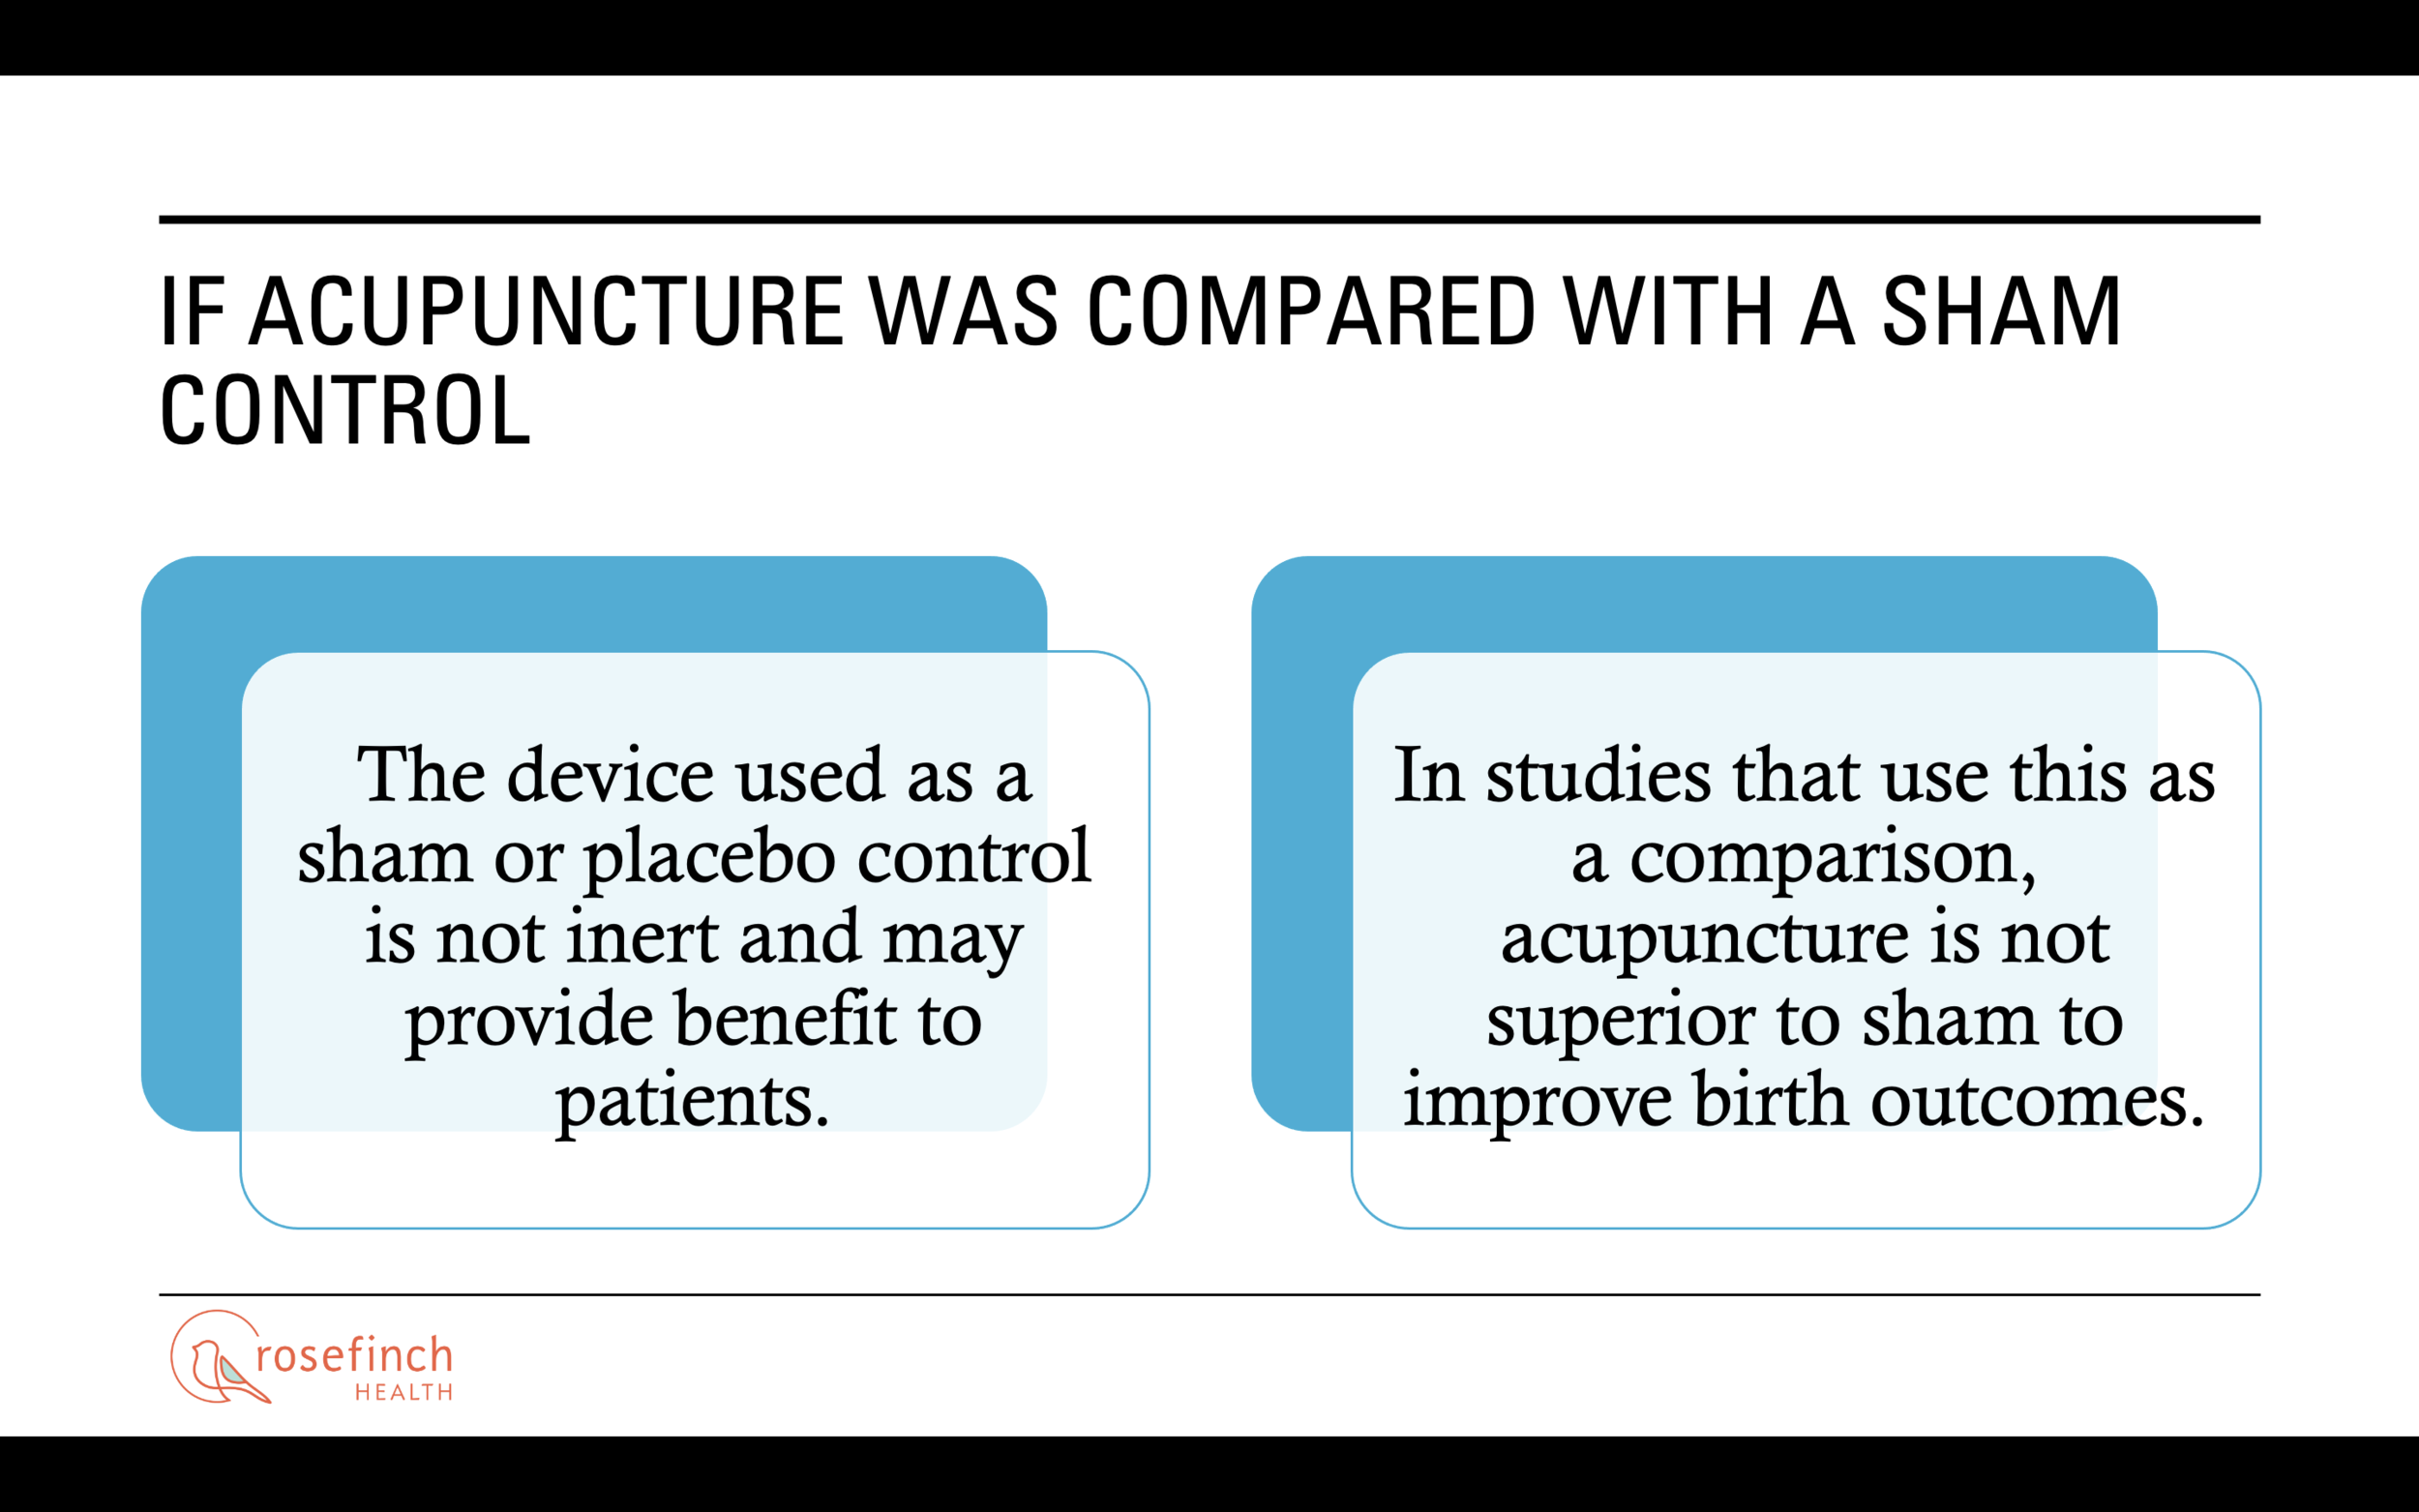 If acupuncture was compared with a sham control